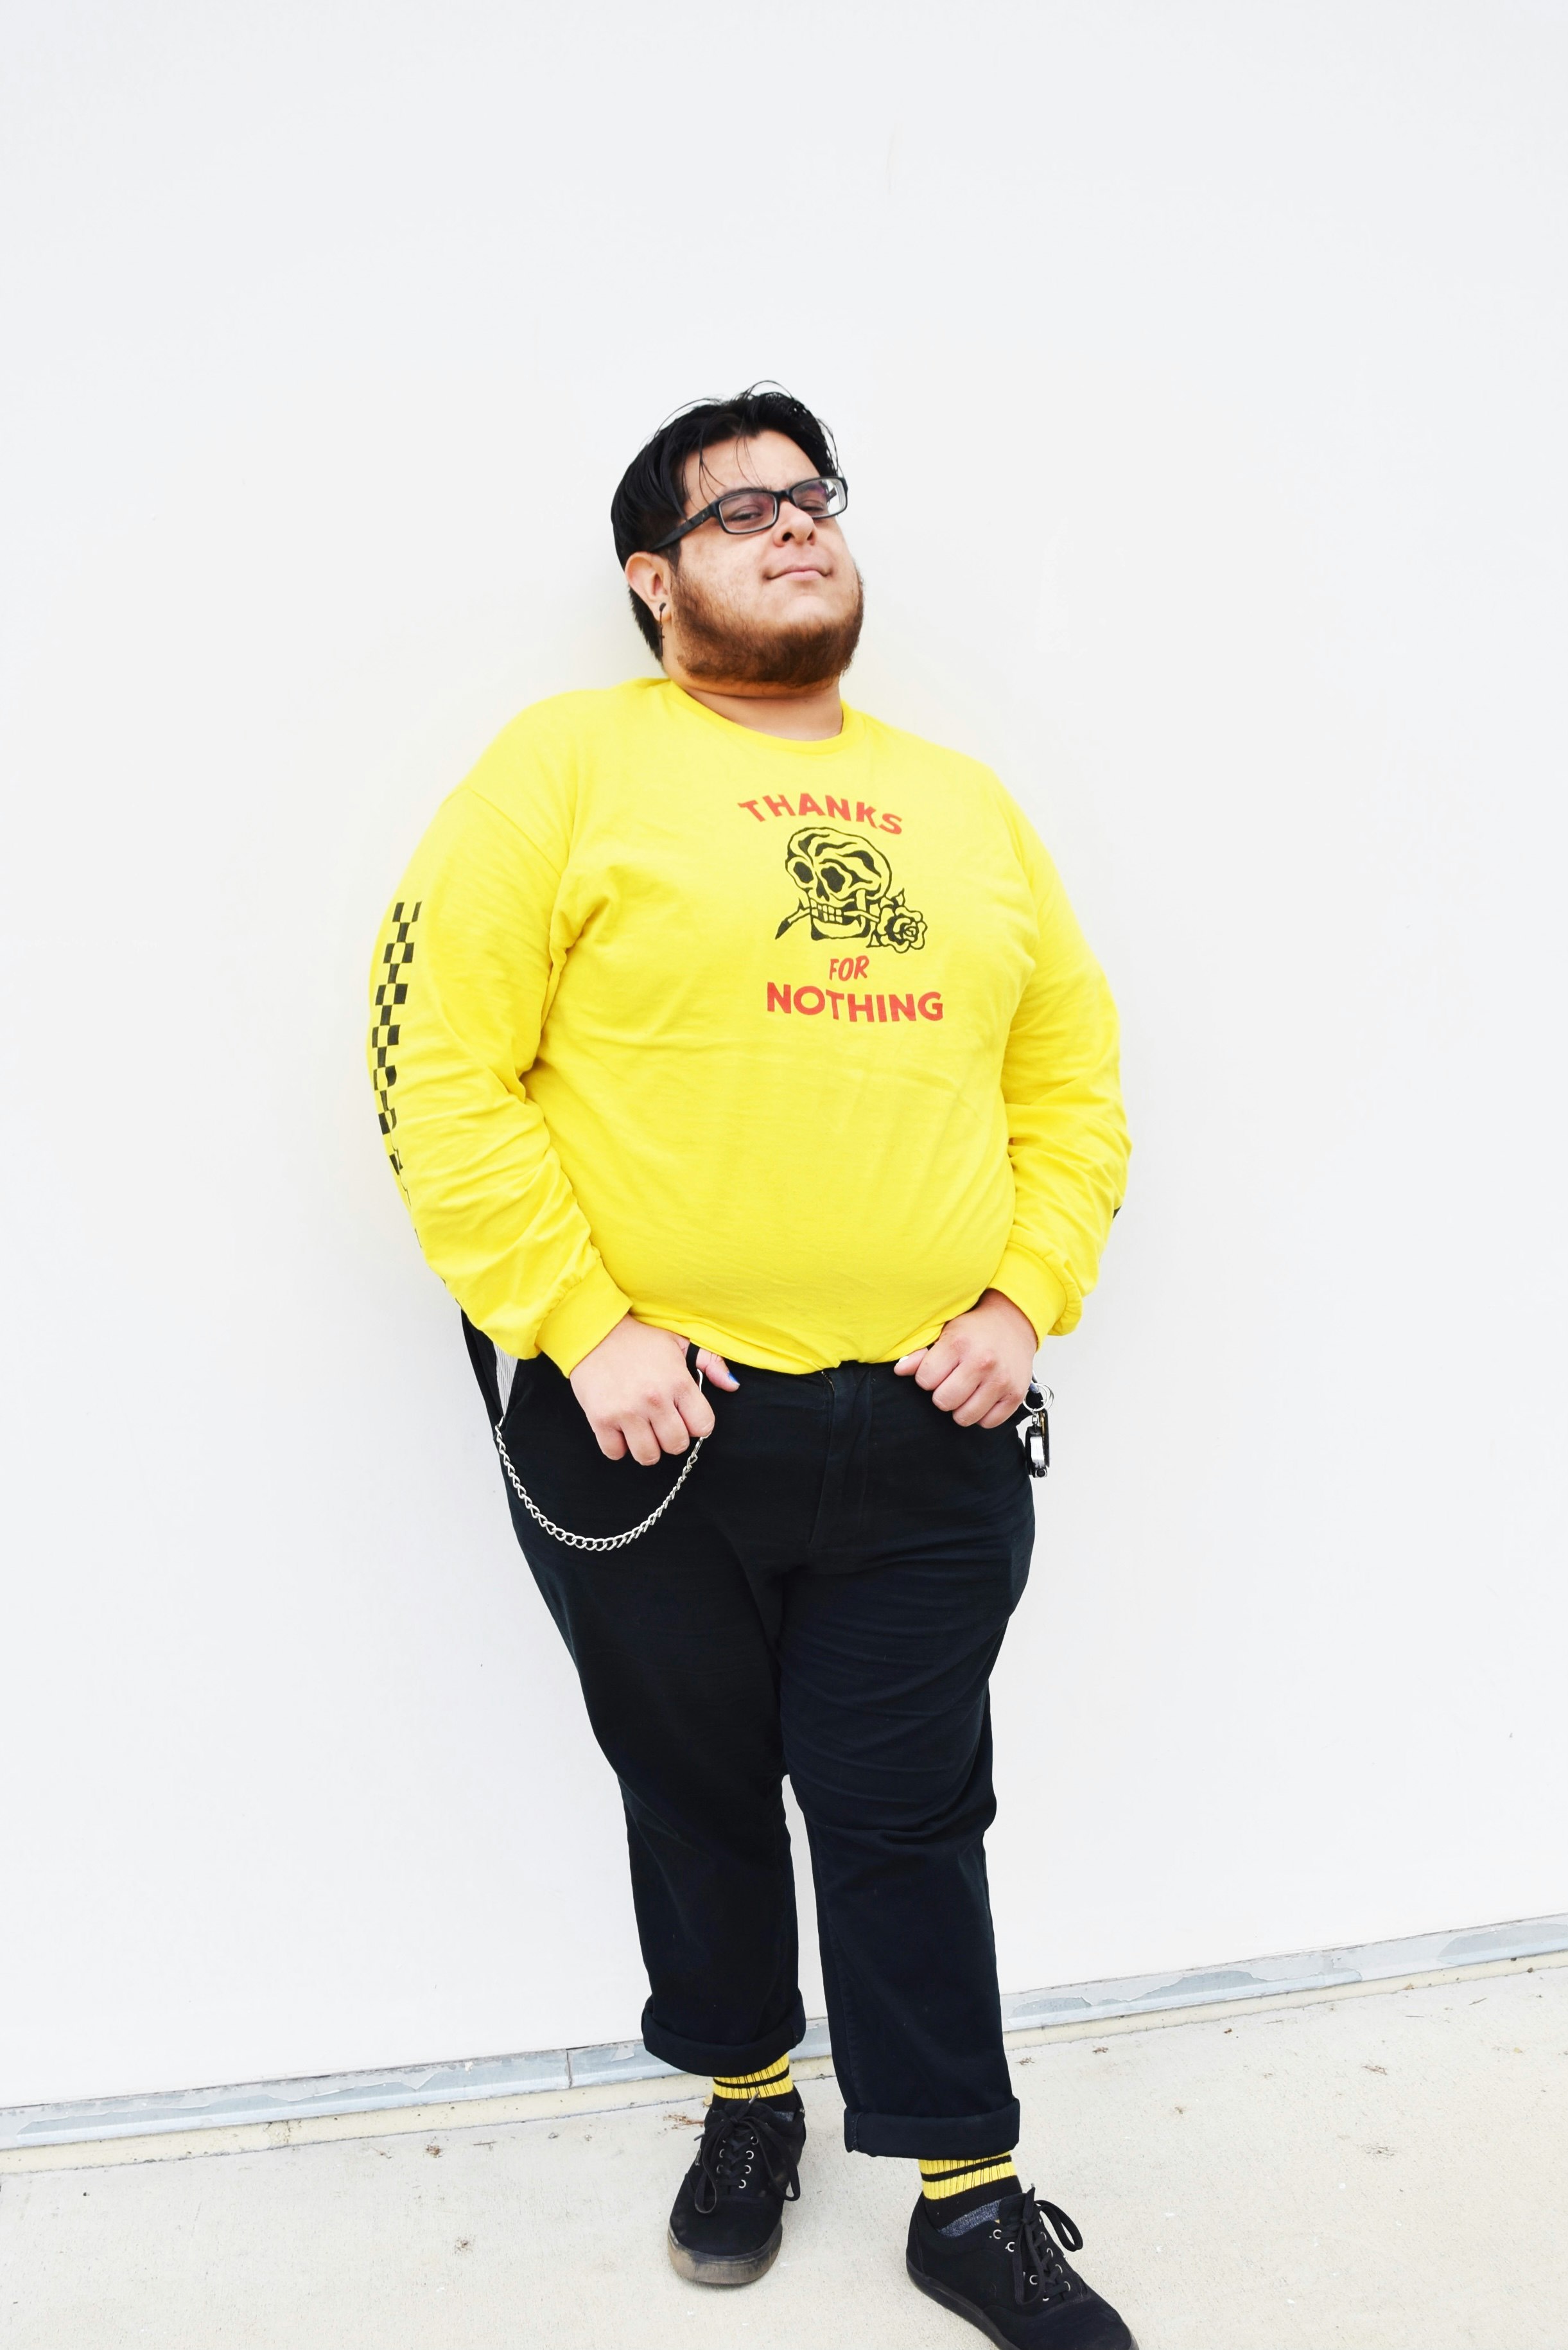 man in yellow crew neck long sleeve shirt and black pants